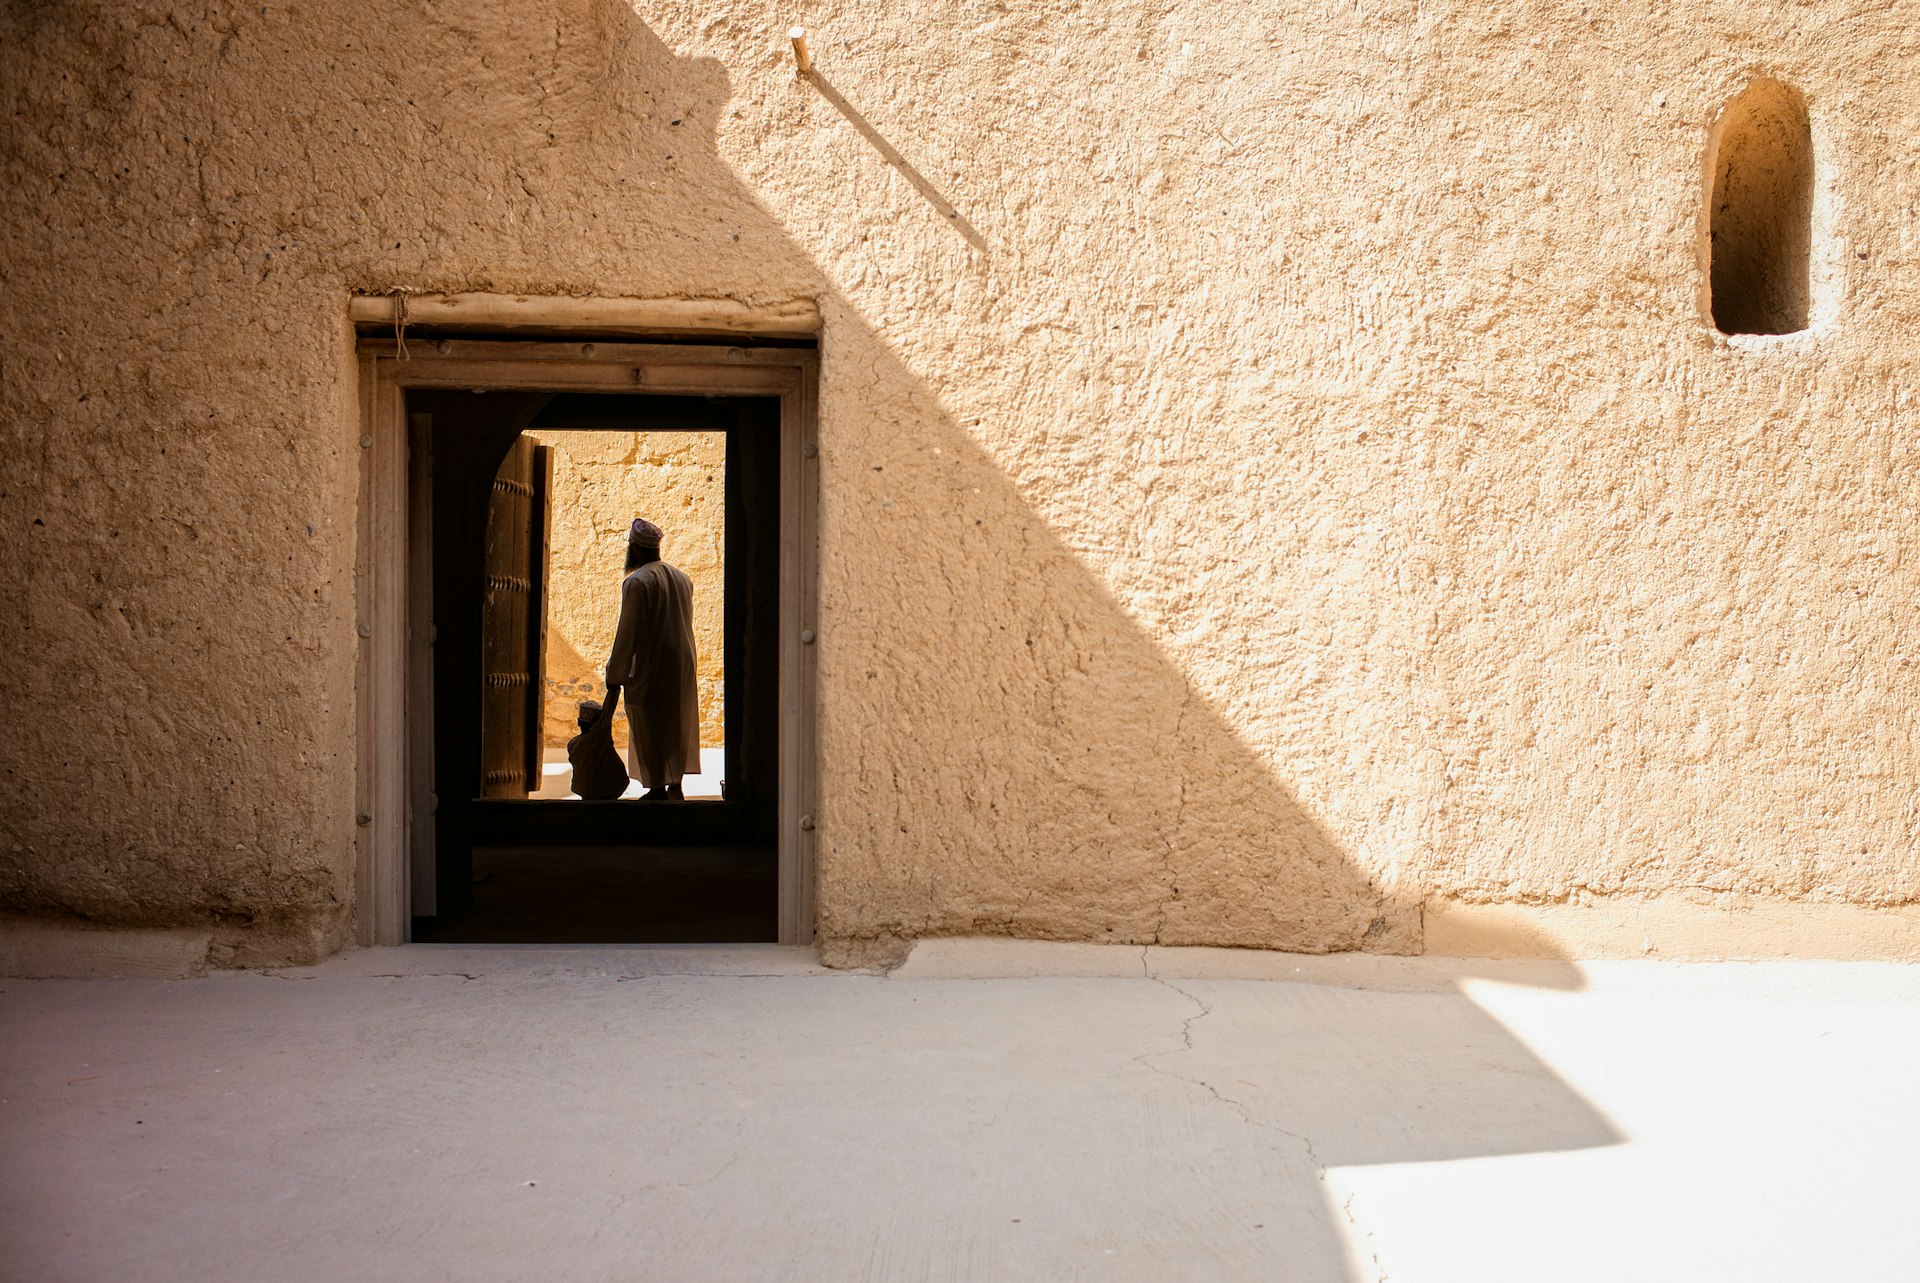 A man and a child holding hands in silhouette are framed by a doorway in a large sand-colored fortress building